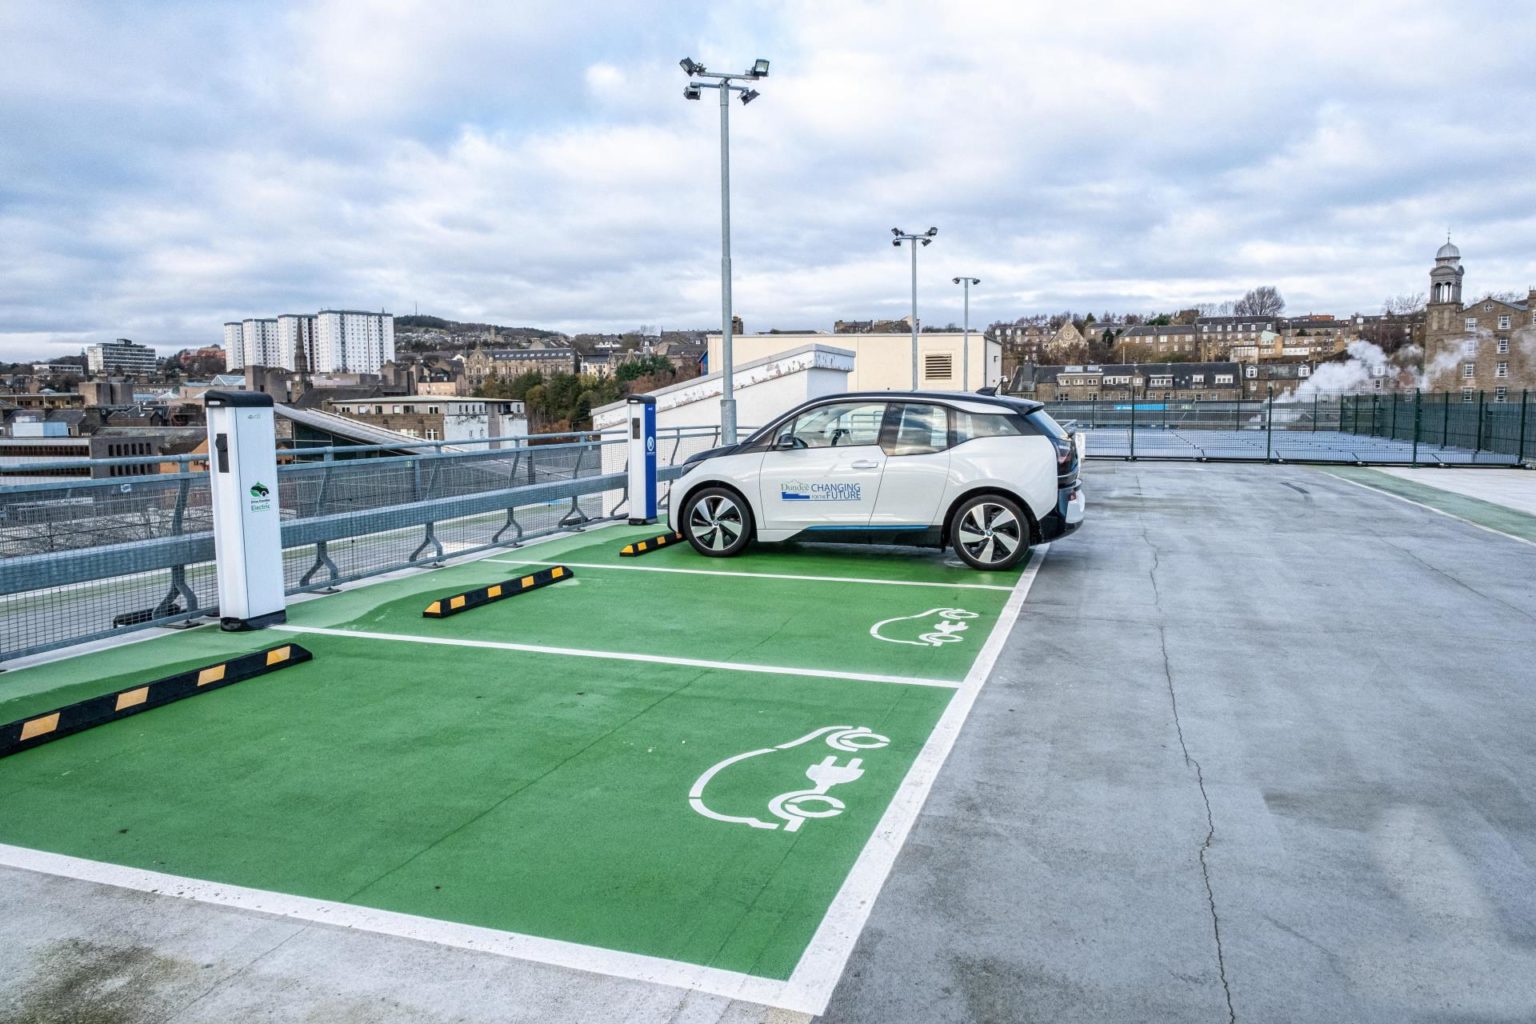 SPONSORED Go ahead for new EV chargers in Dundee's multistorey car parks